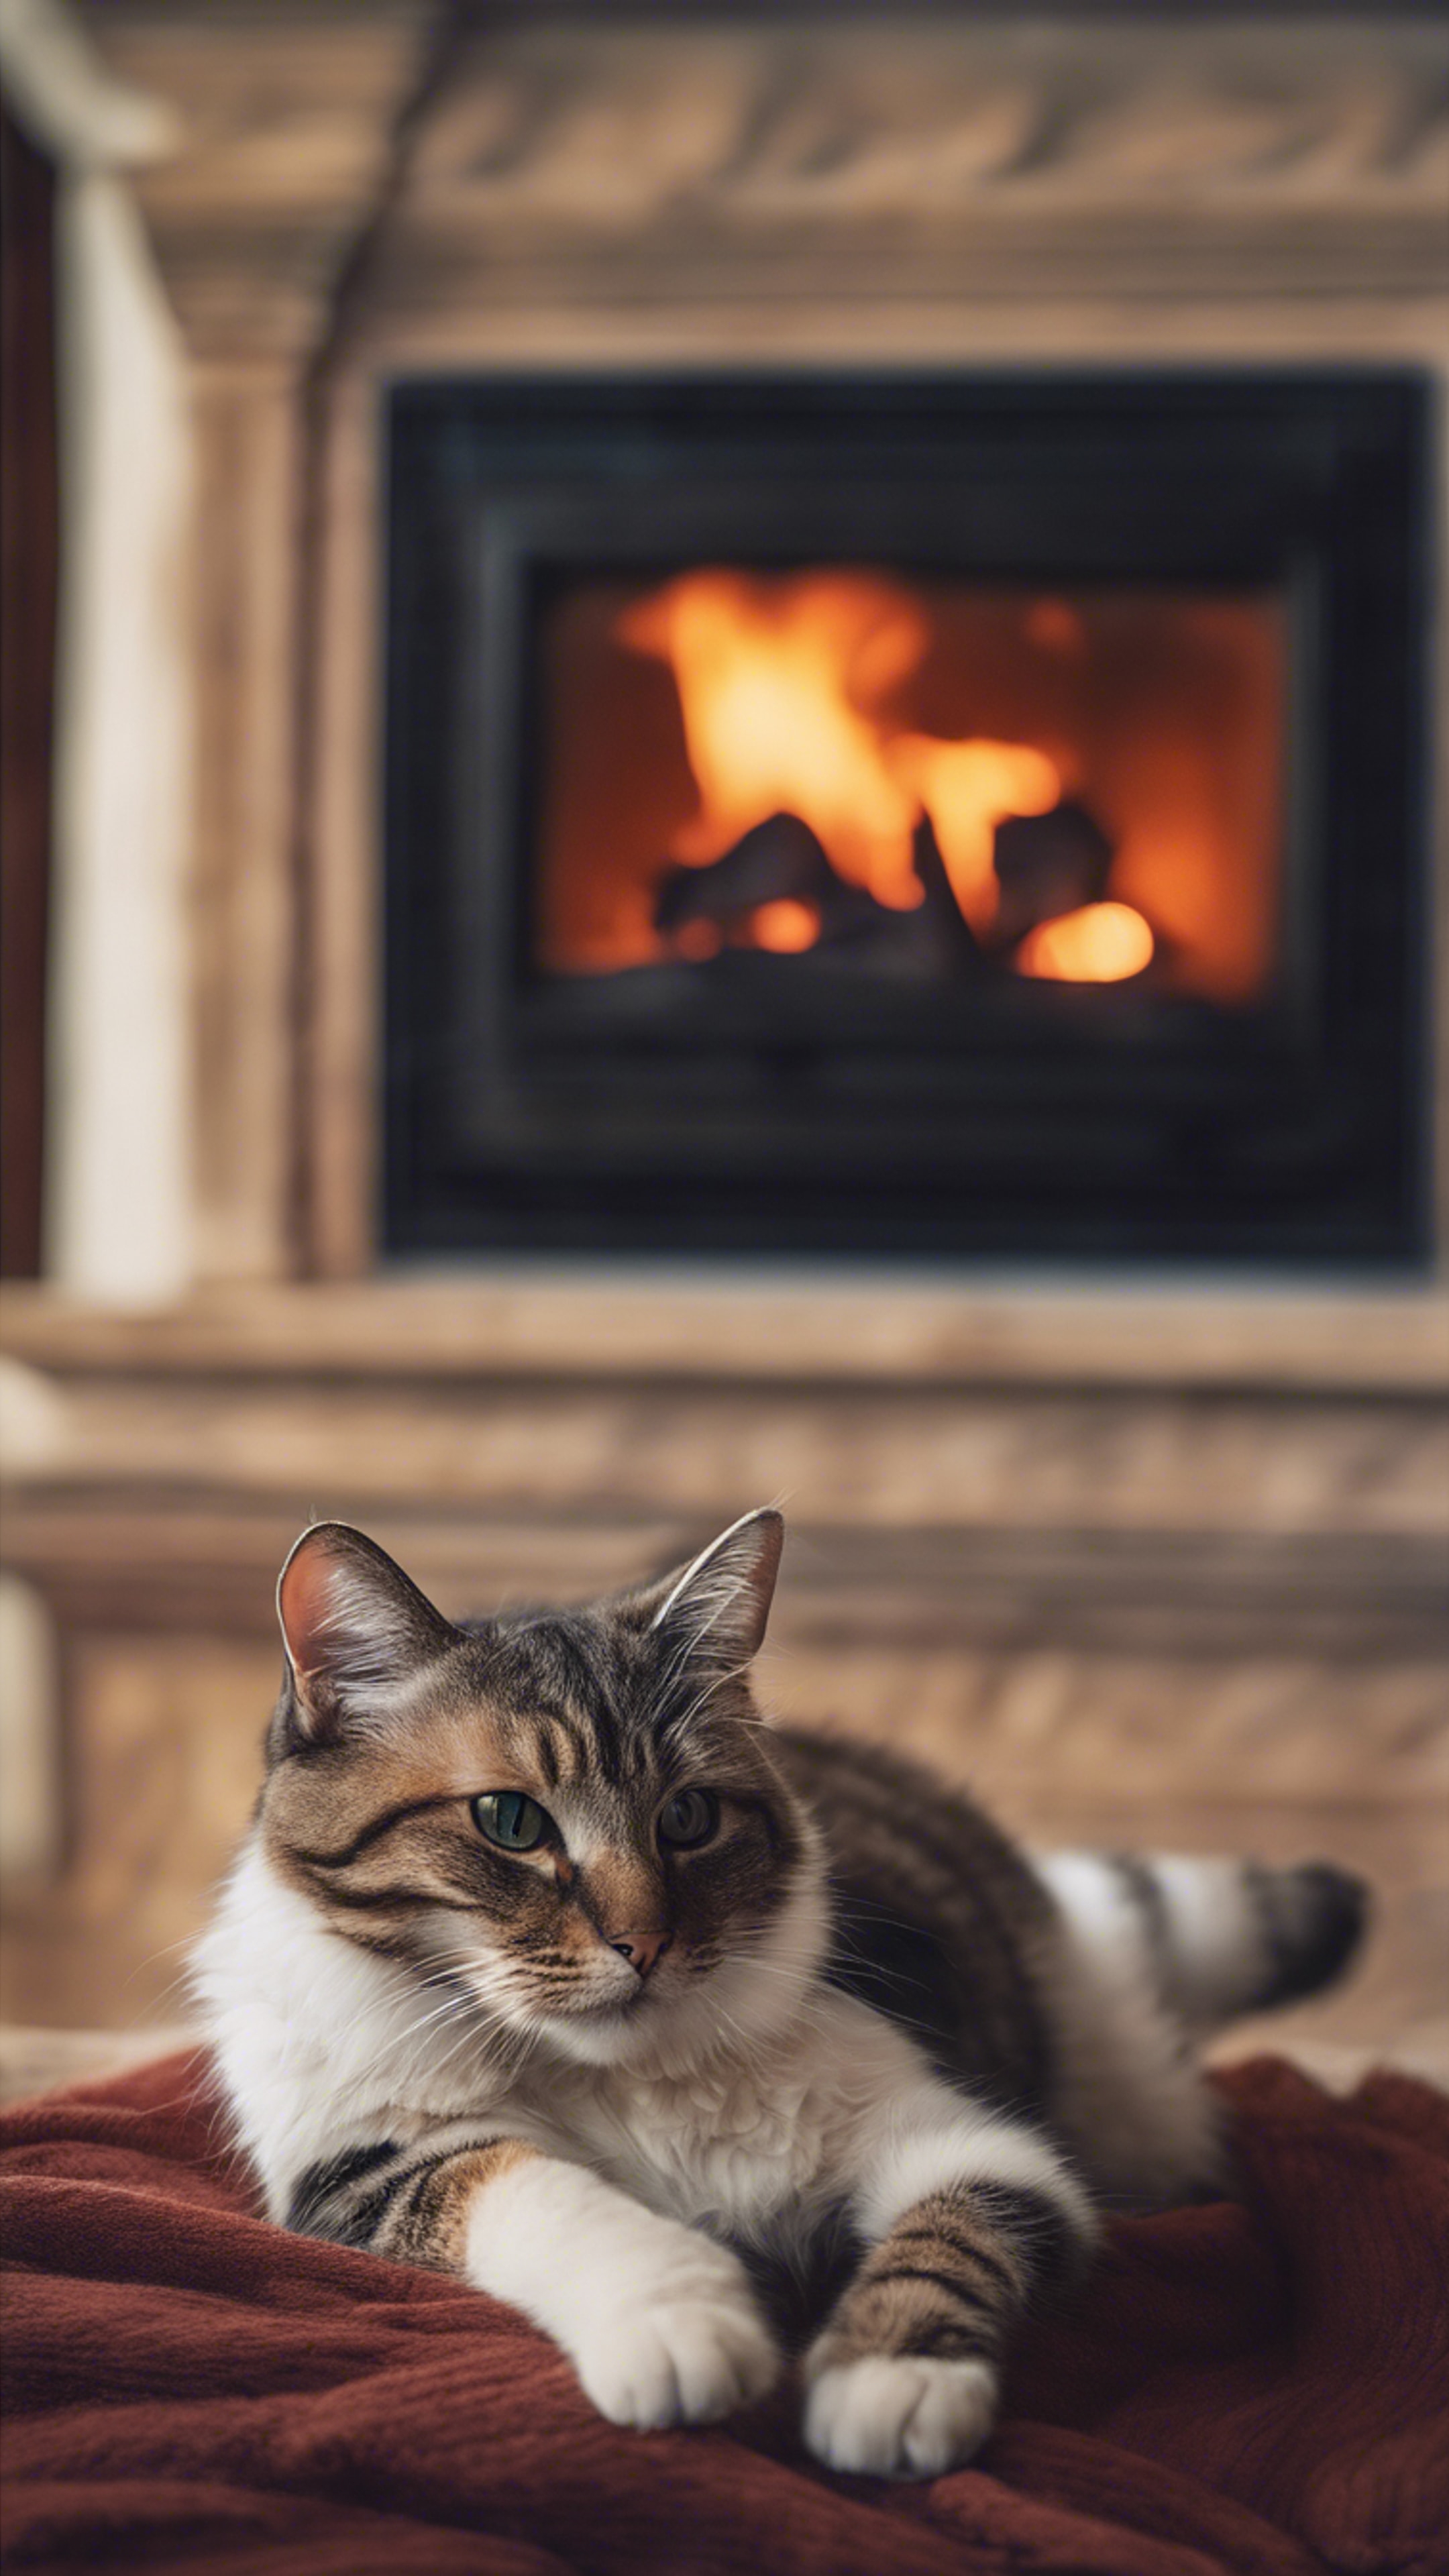 A cat lounging in front of a roaring fireplace, completely mesmerized by the flickering flames. Wallpaper[f30d5ca7e04c497dade0]